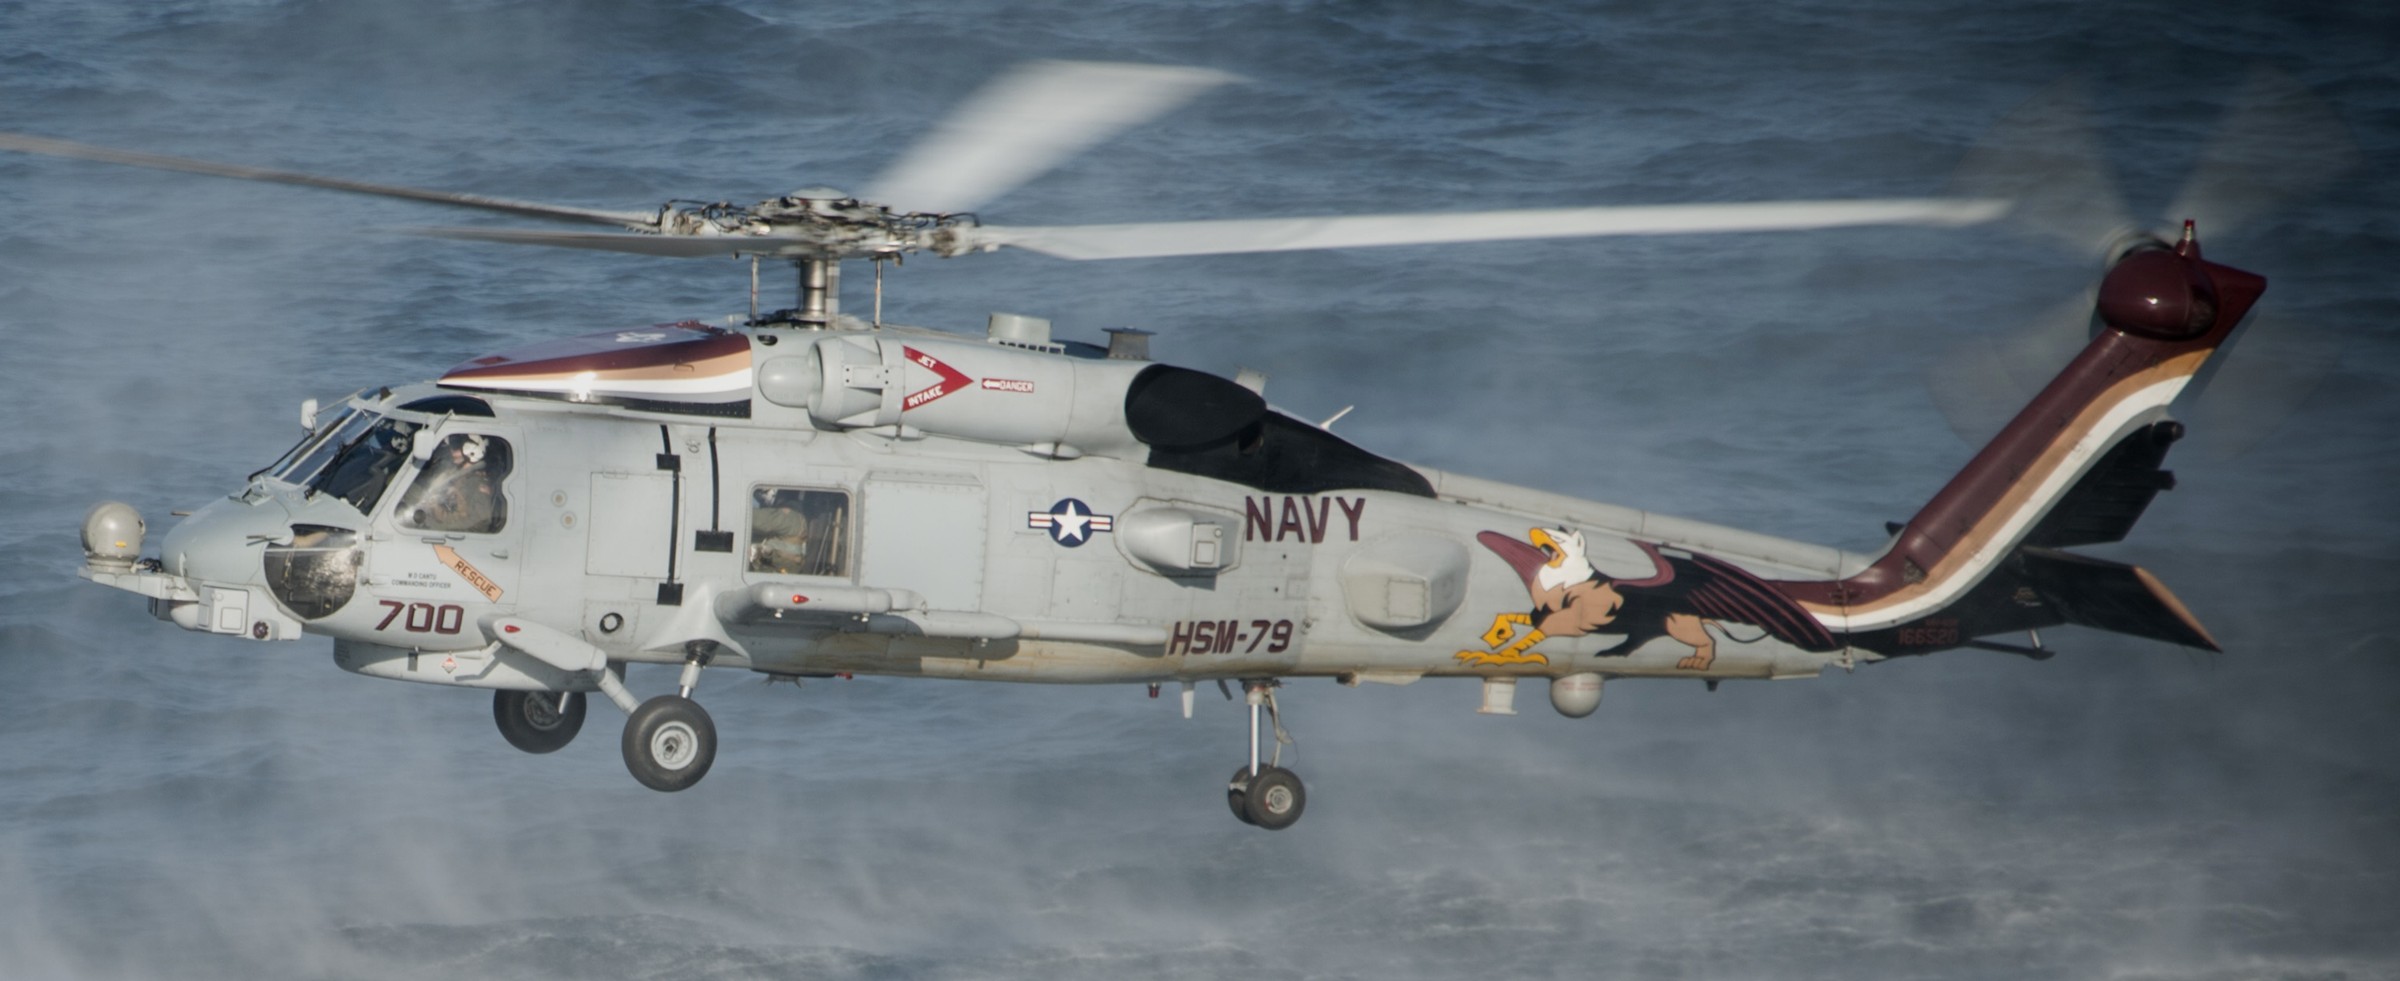 hsm-79 griffins helicopter maritime strike squadron mh-60r seahawk us navy 2017 05